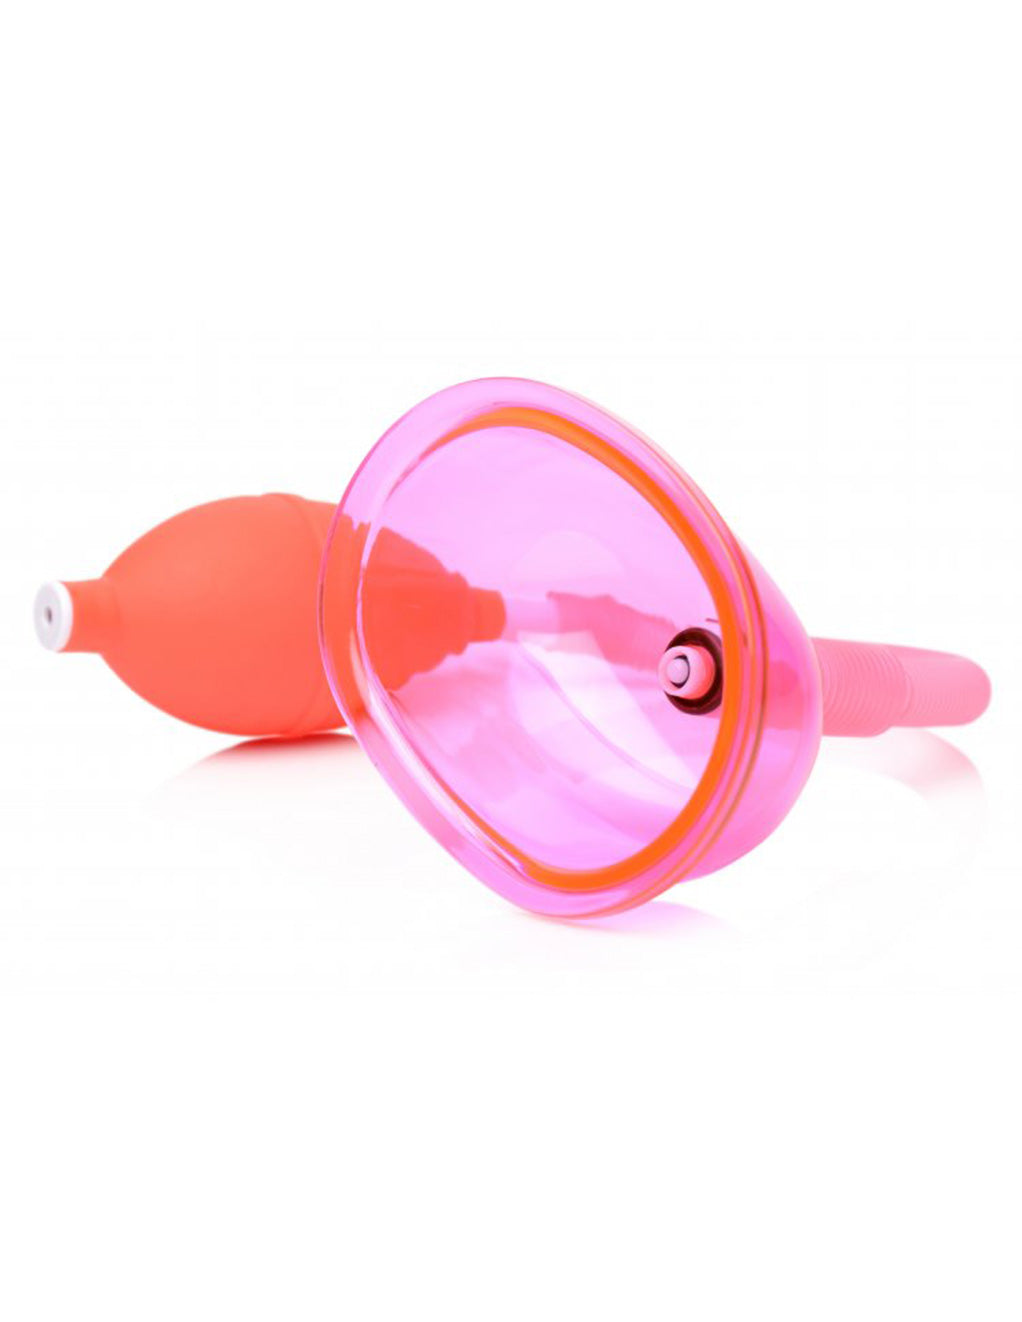 Vaginal Pump By XR Brands Front